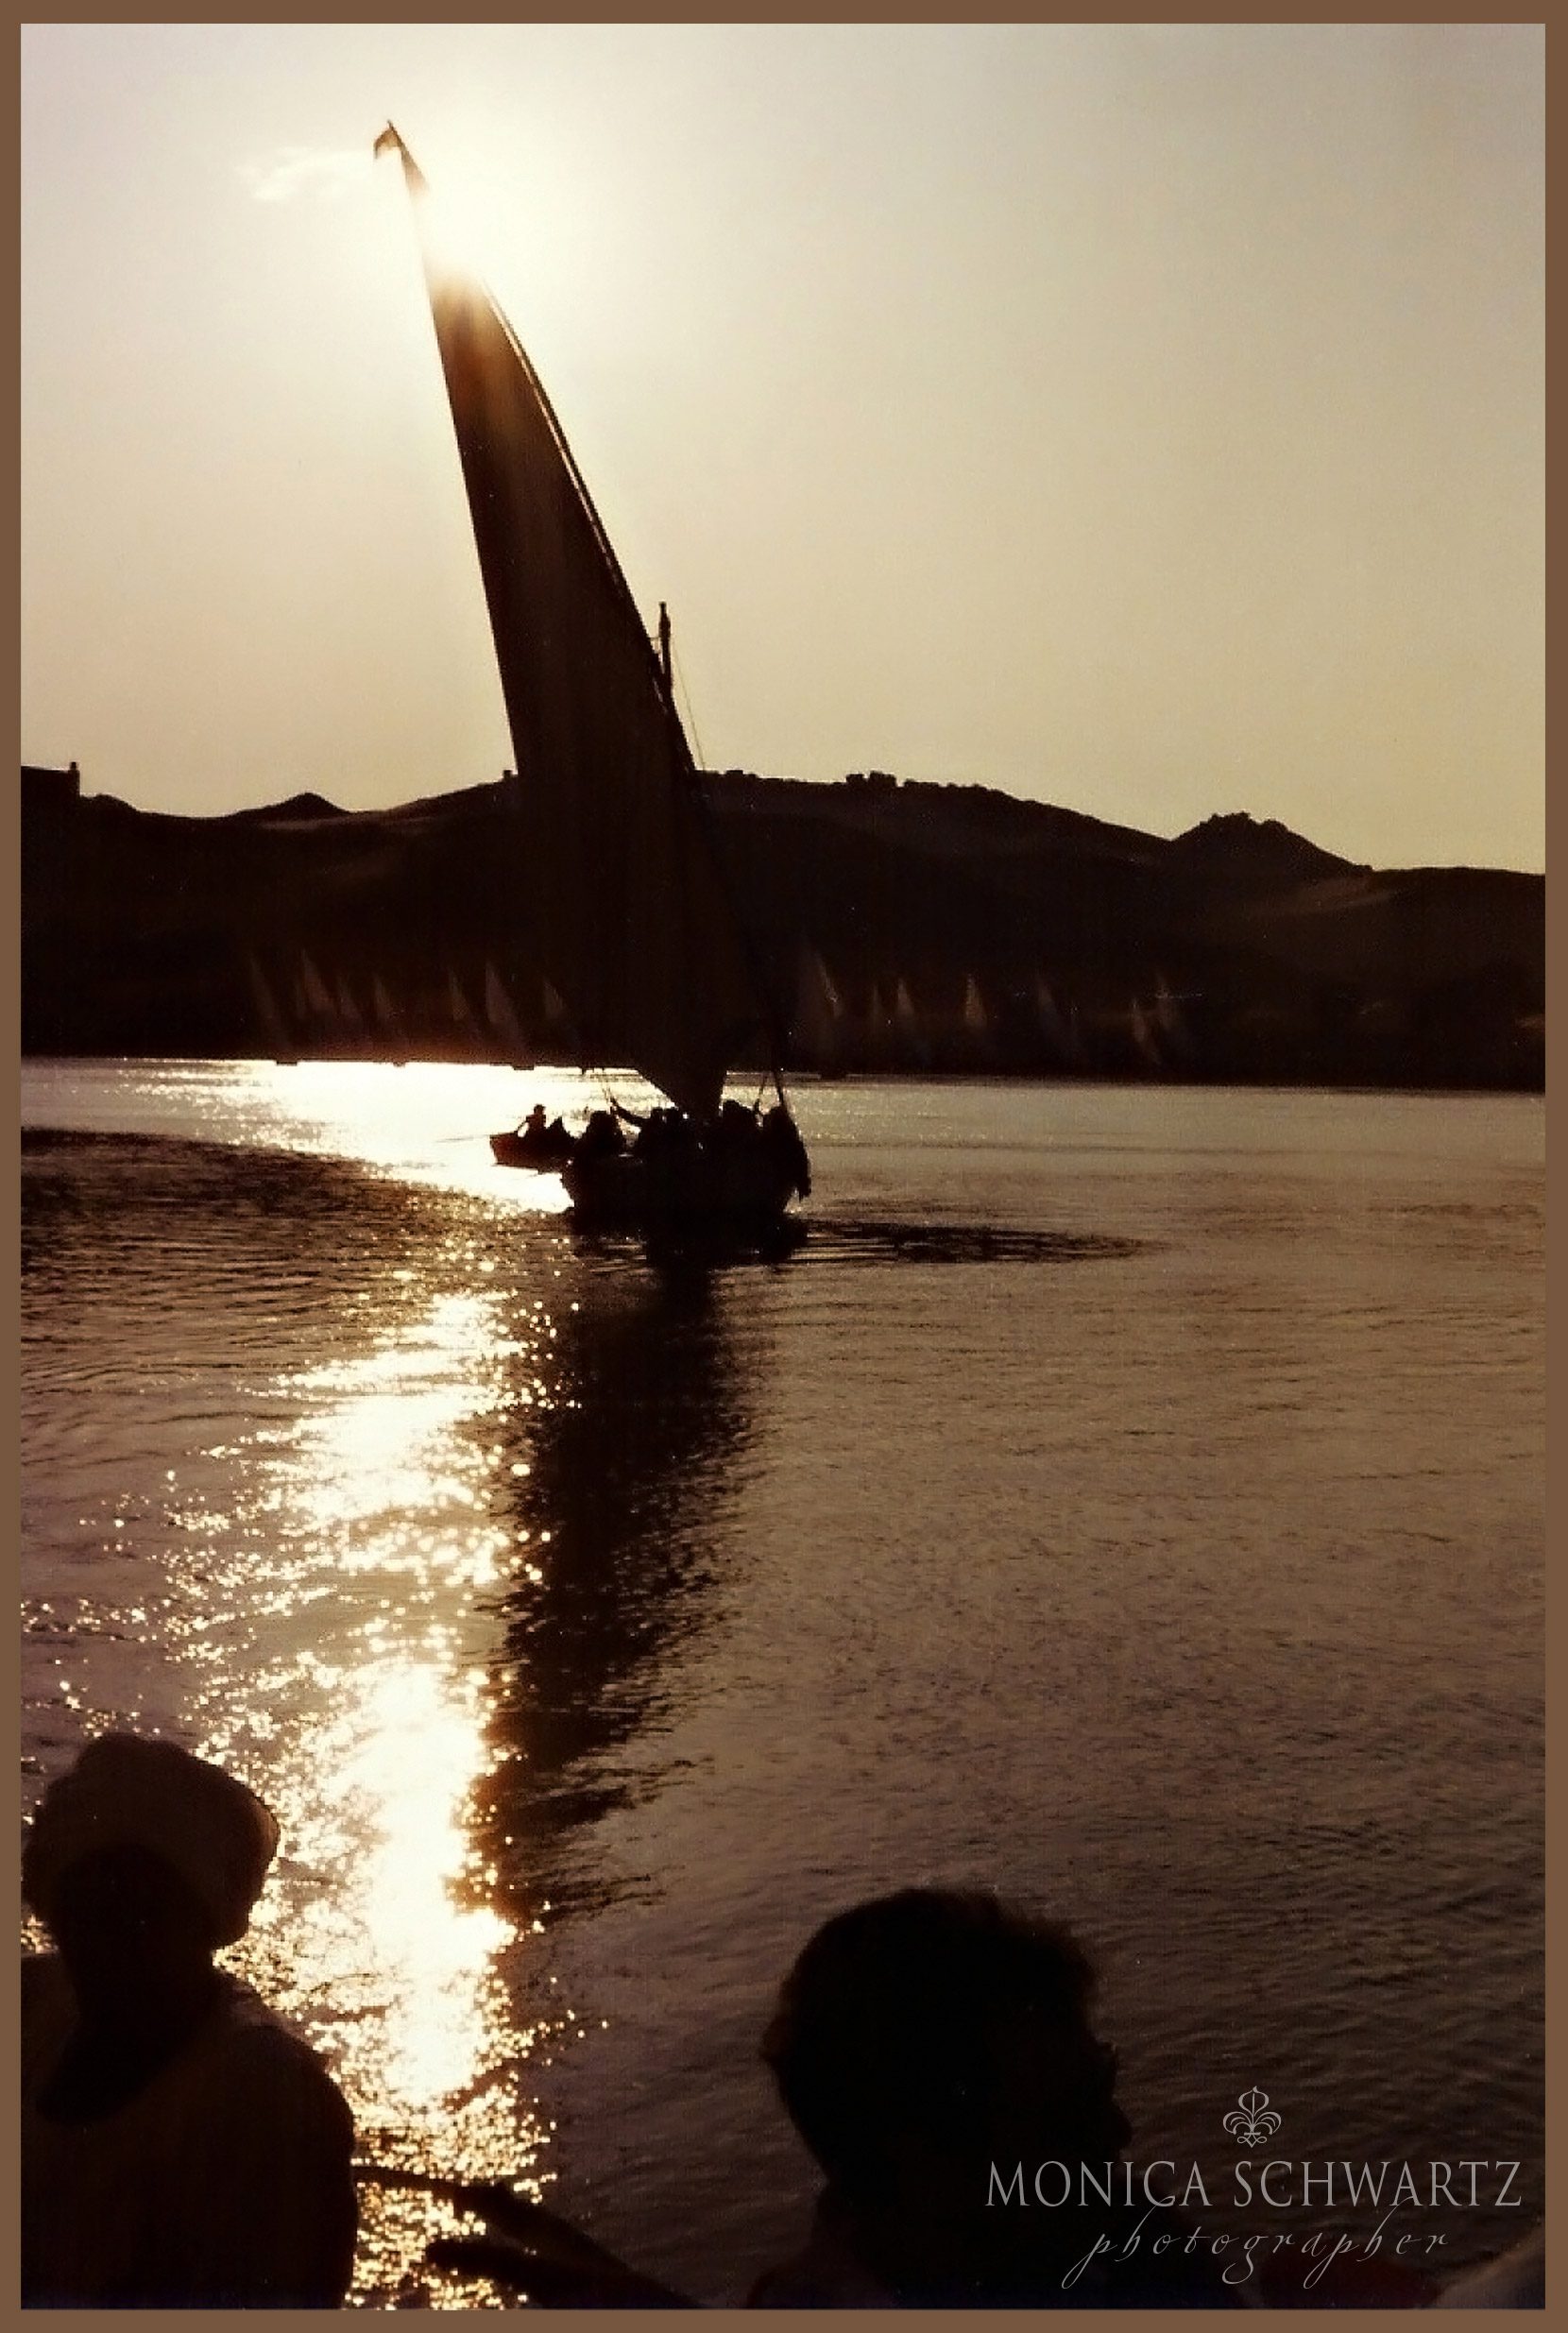 Sailing-in-a-felucca-at-sunset-on-the-Nile-river-Aswan-Egypt